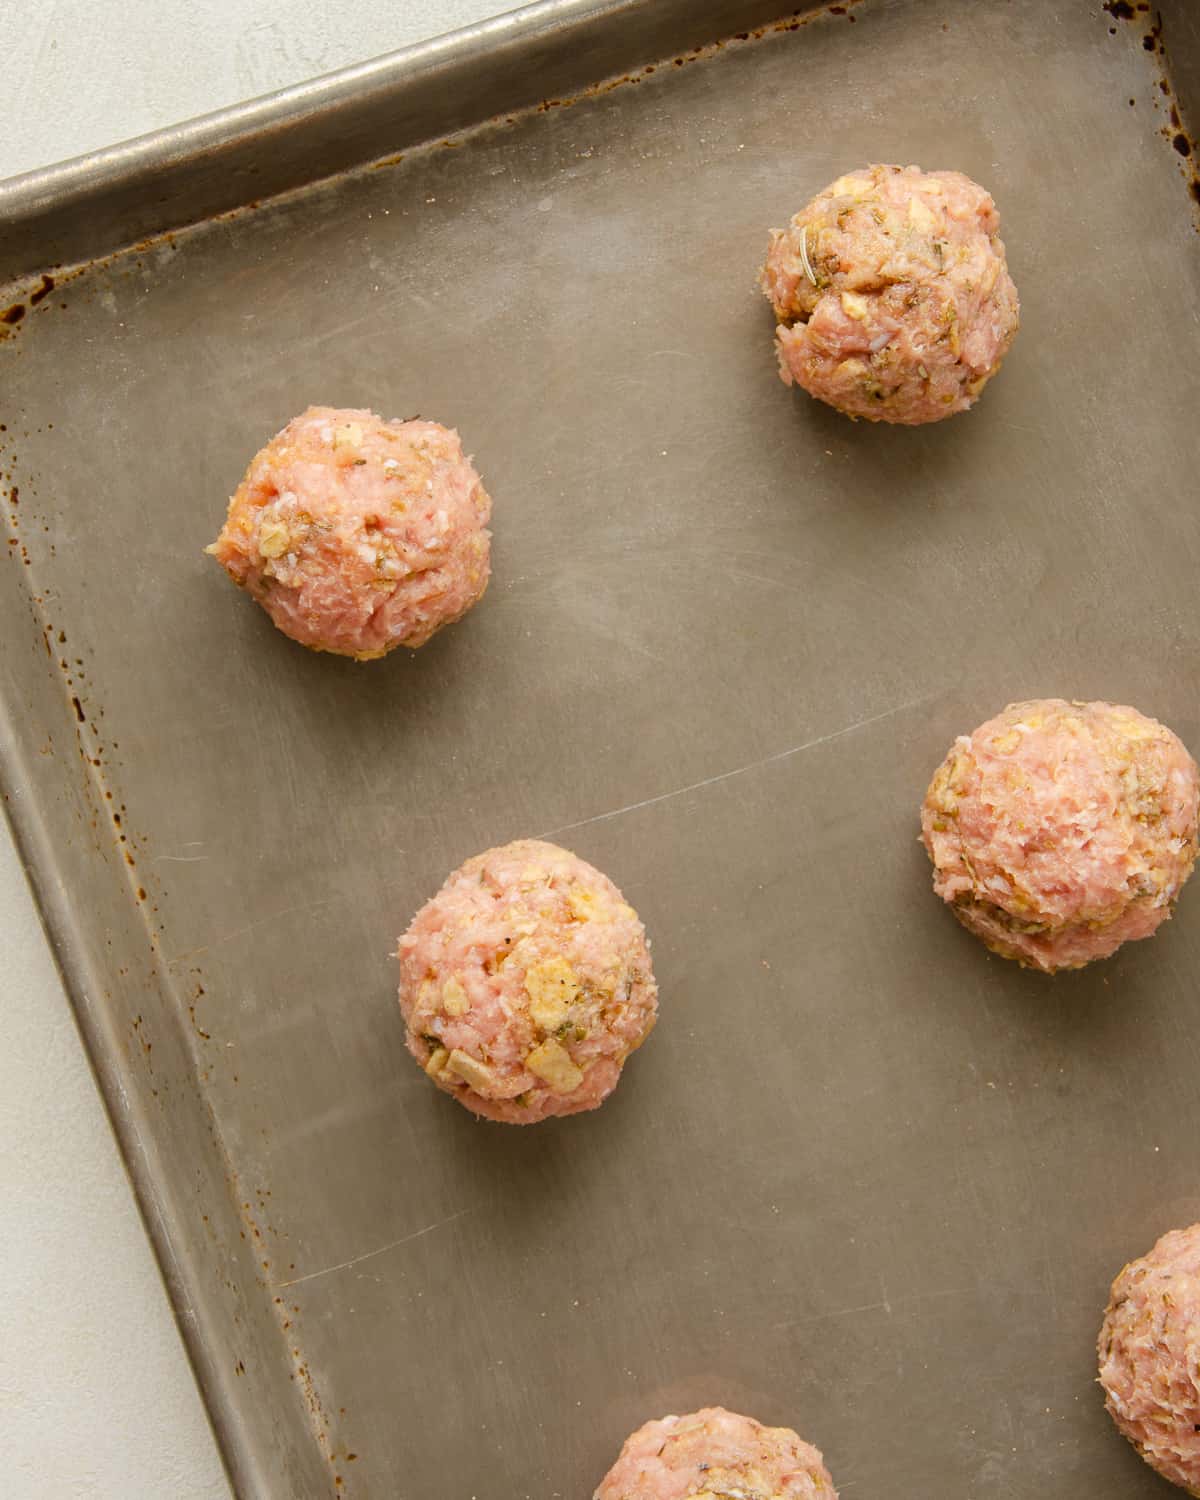 Raw meatballs on a baking sheet ready for the oven.